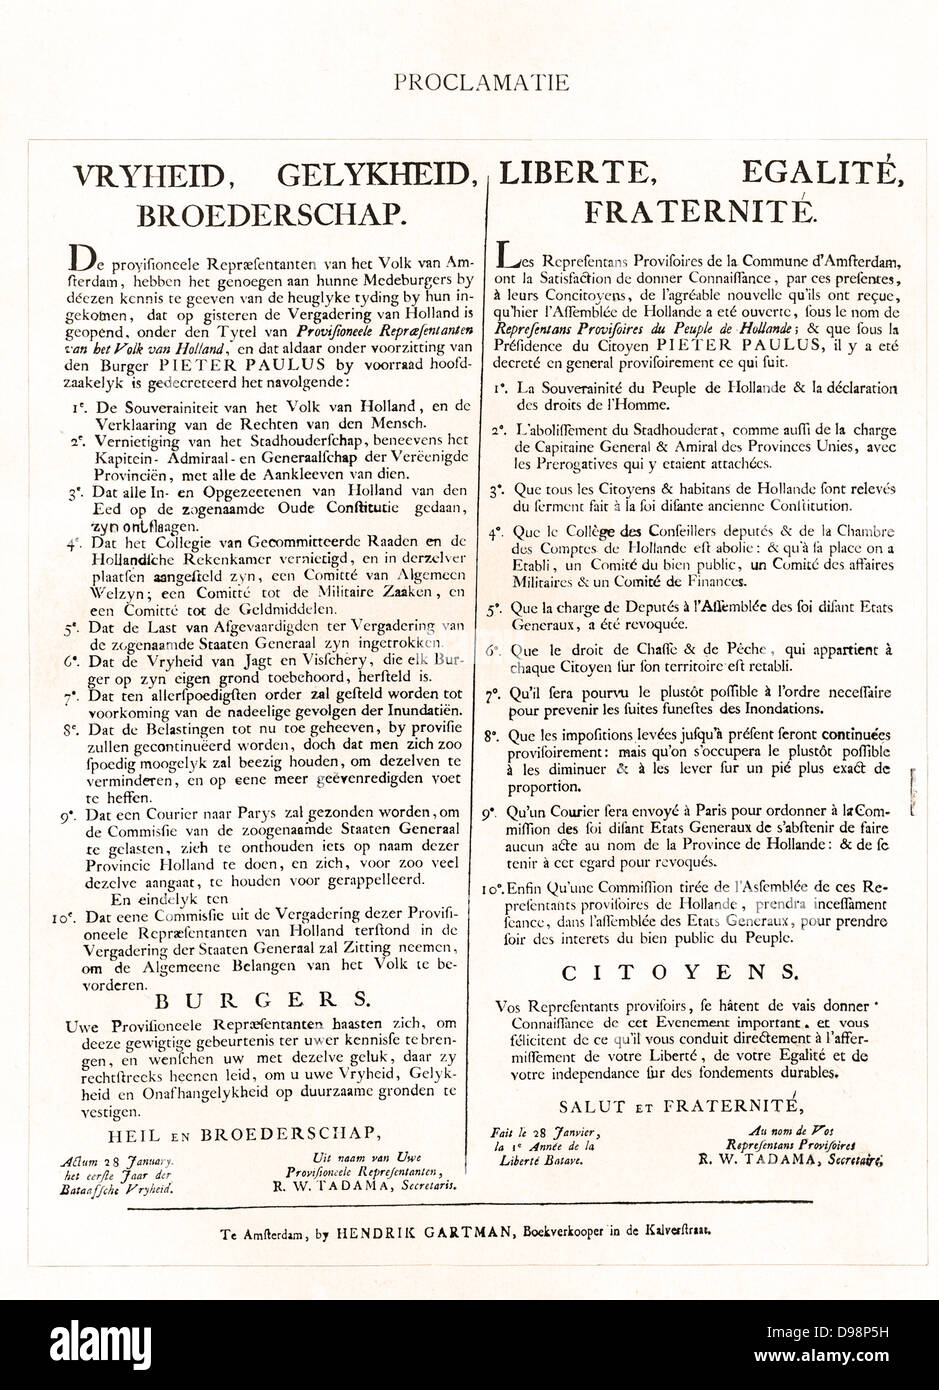 Publication in the Netherlands of a French and Dutch version of the Proclamation of rights in the aftermath of the French Revolution. Circa 1789-94. Stock Photo